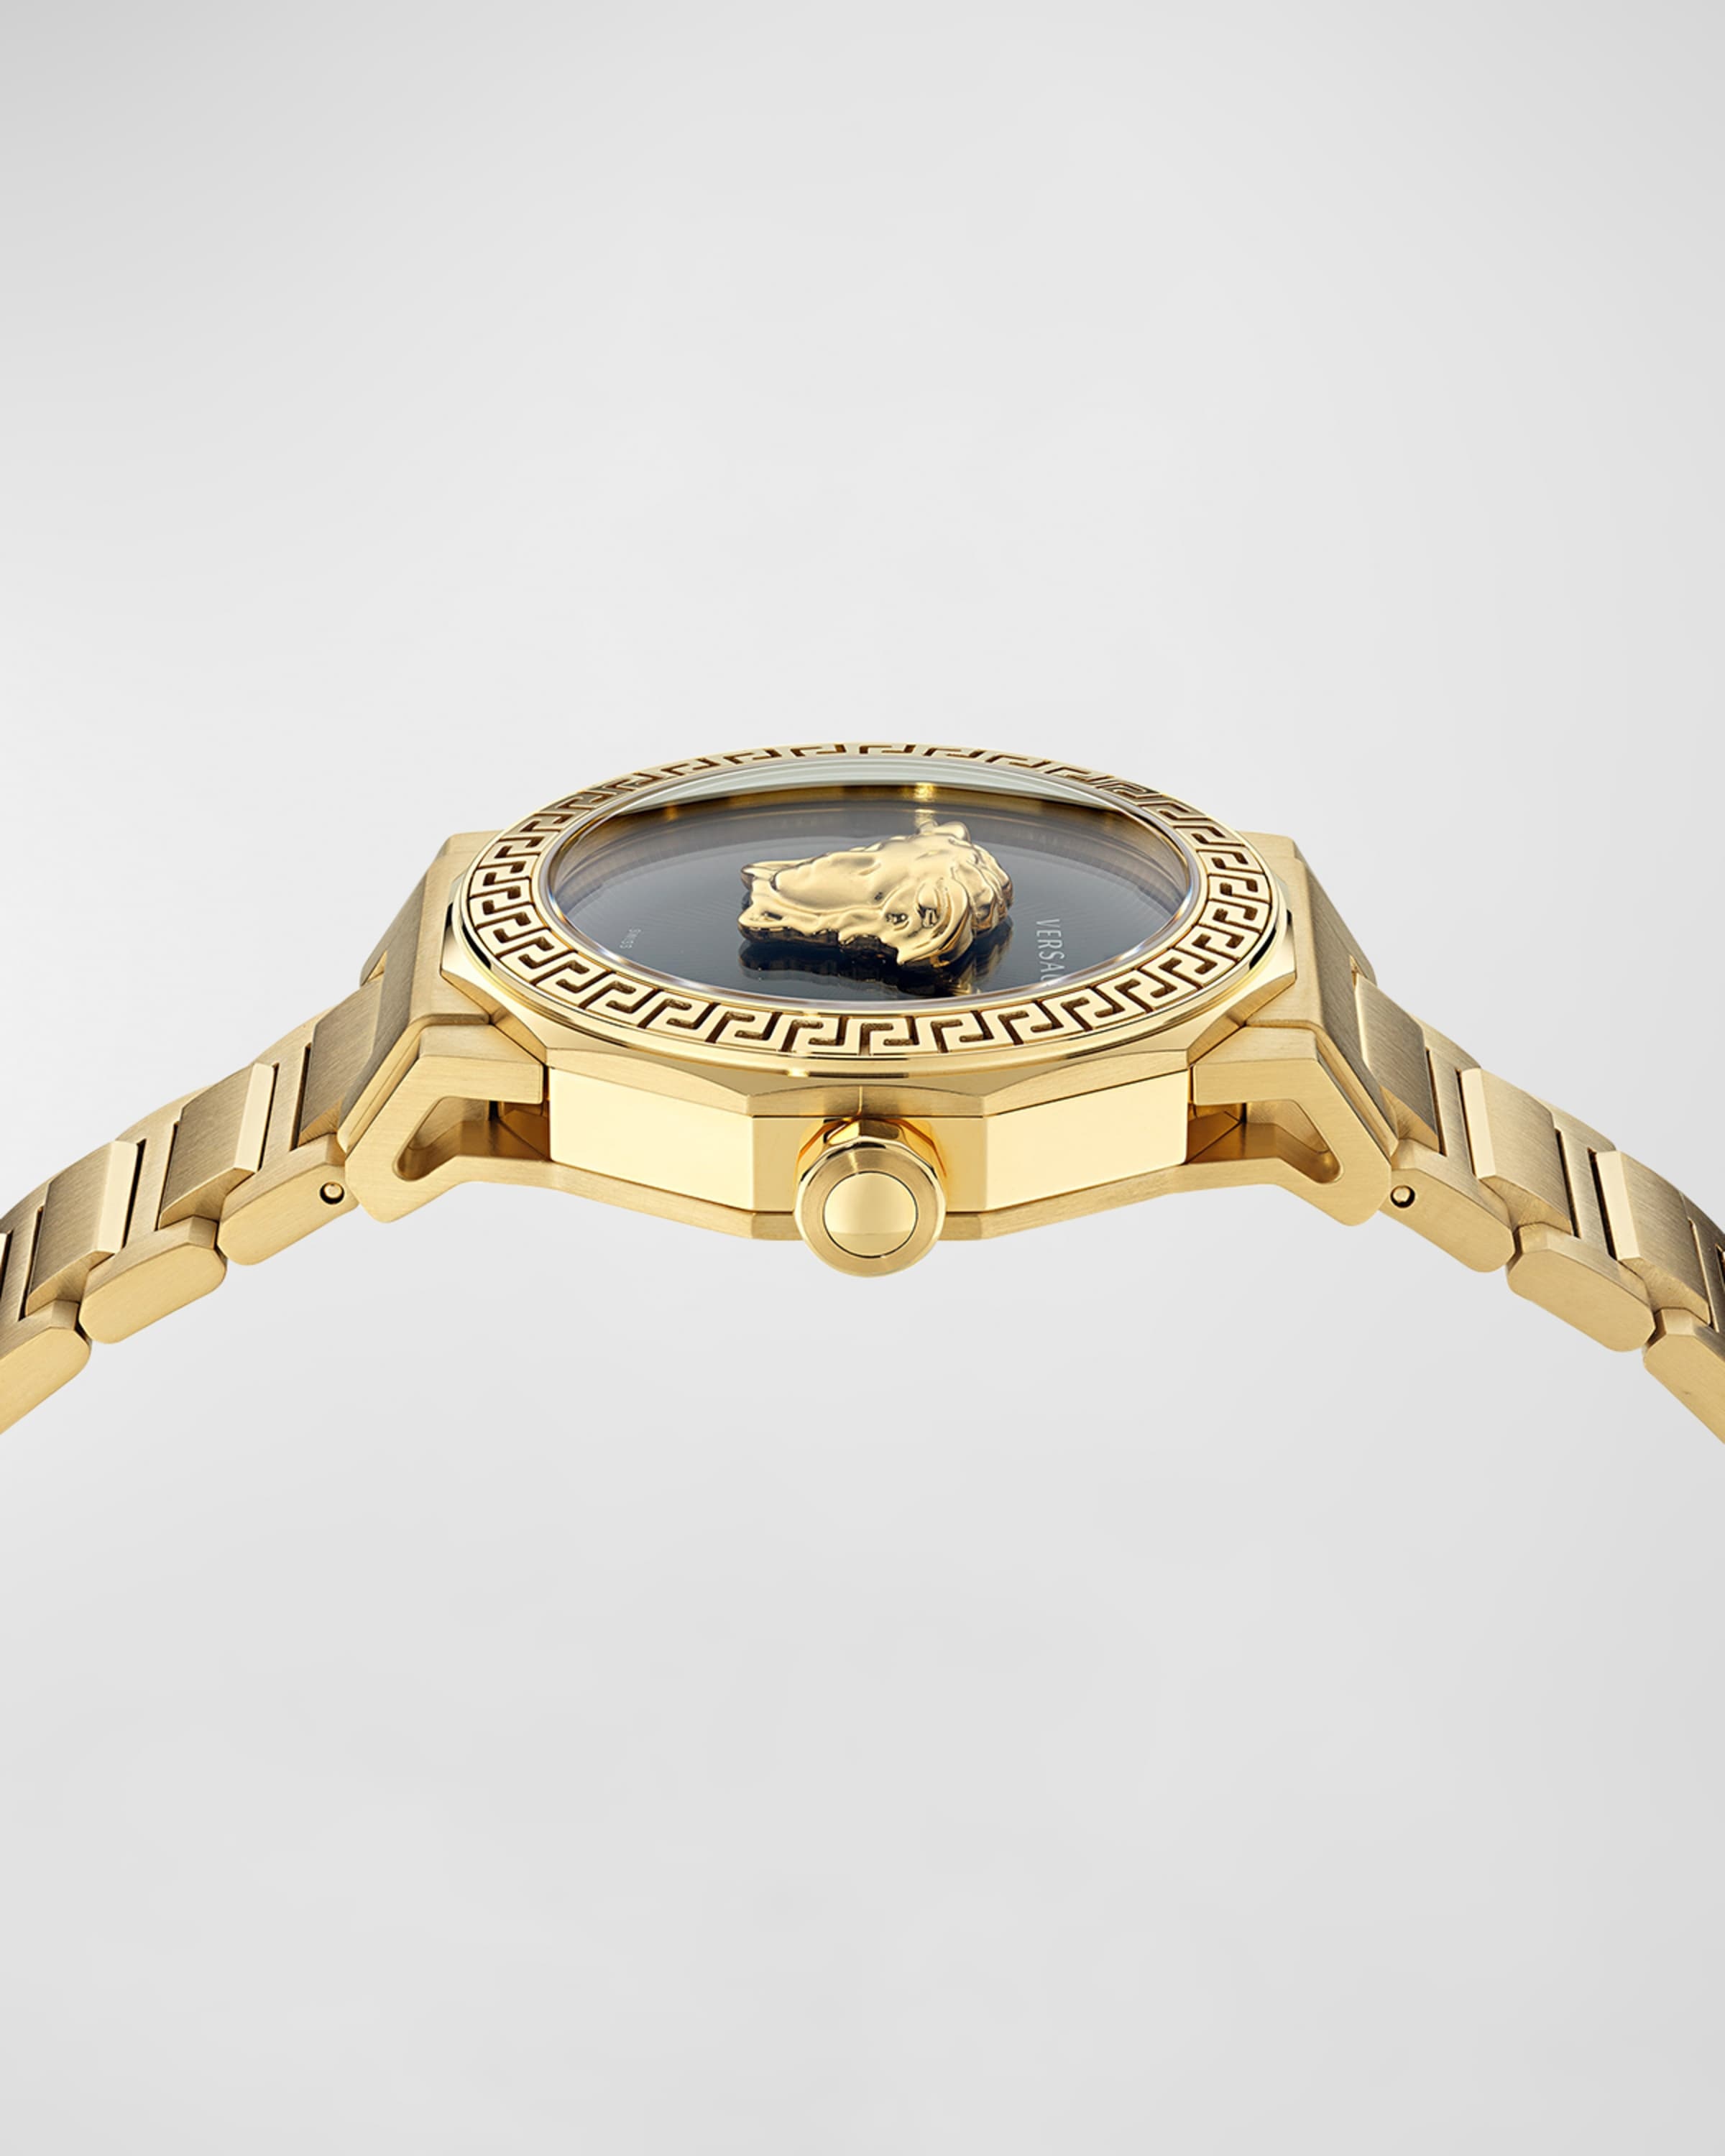 38mm Medusa Deco Watch with Bracelet Strap, Gold Plated - 3